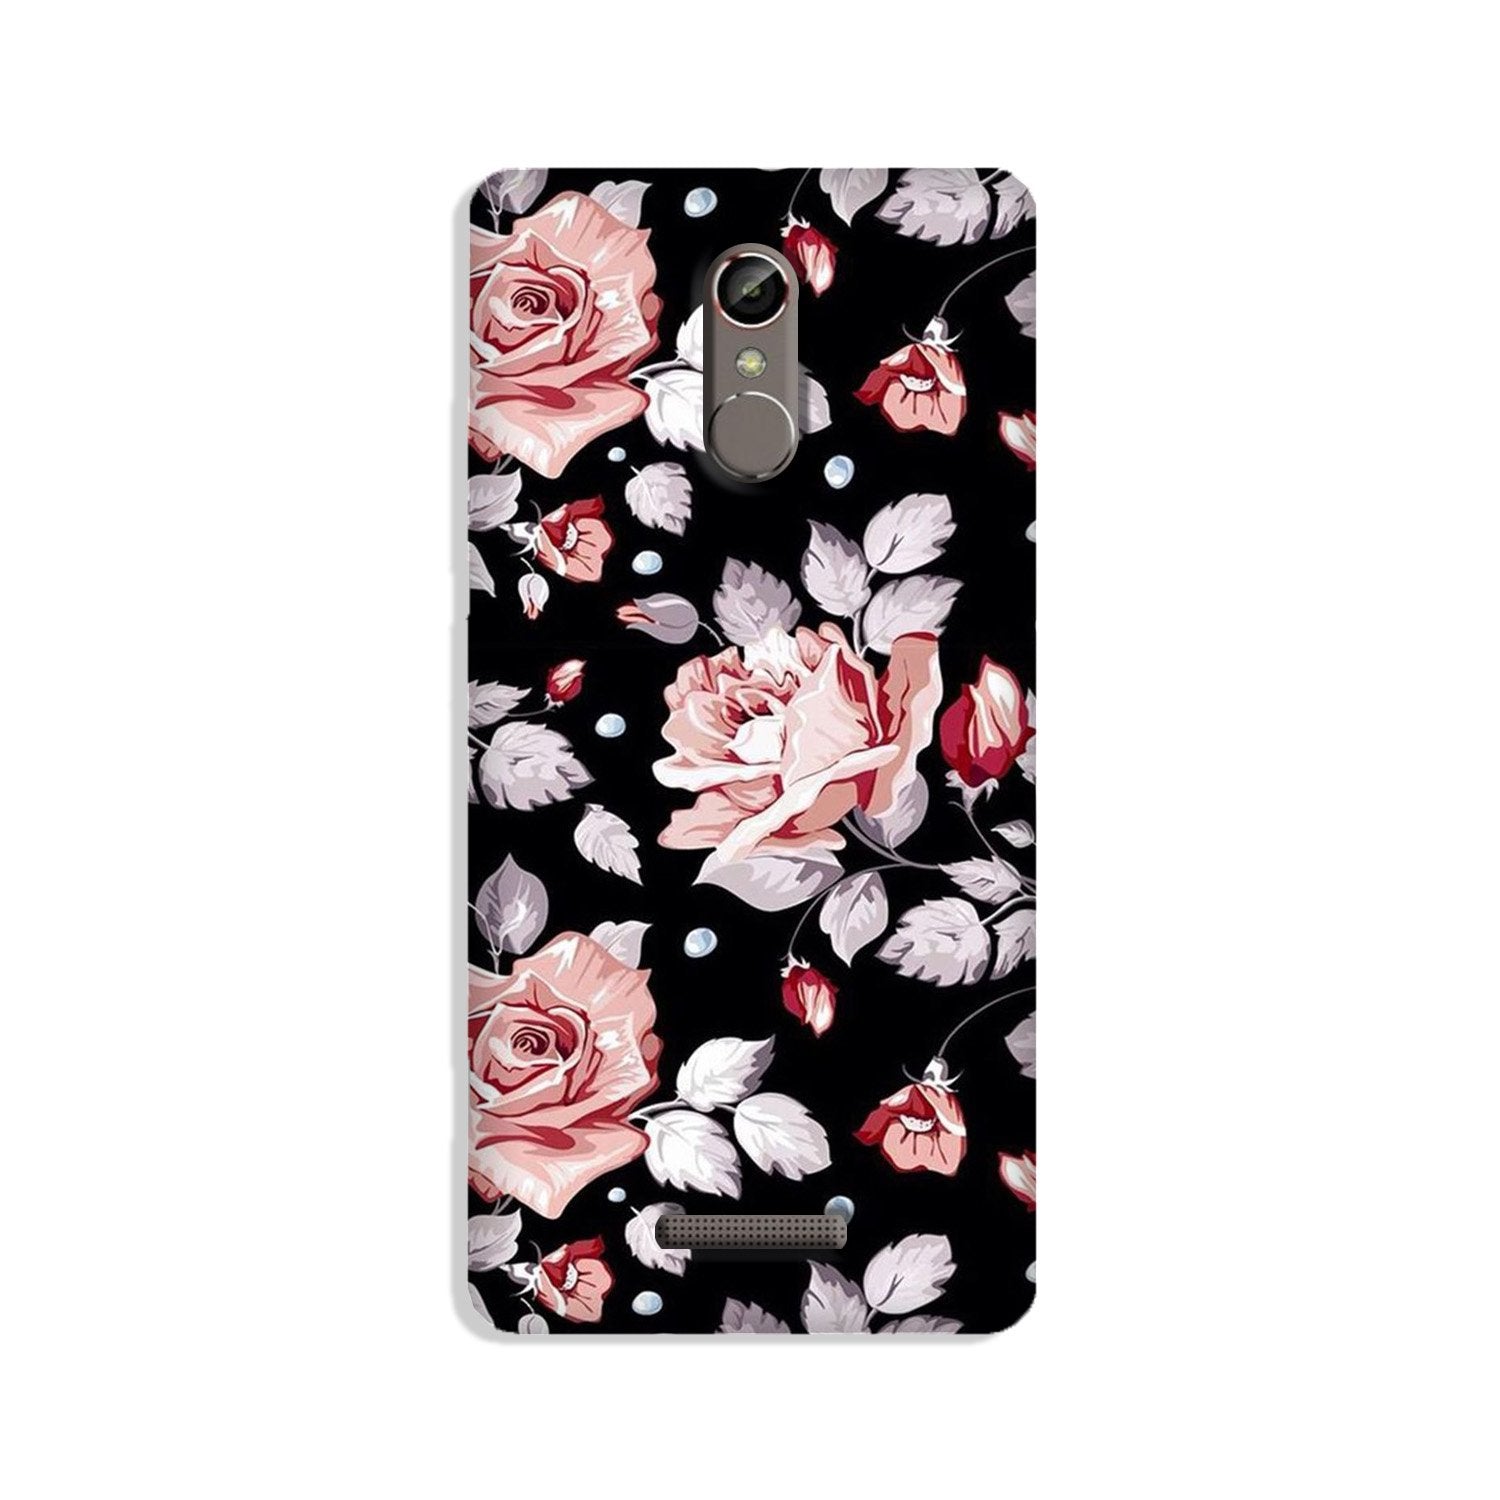 Pink rose Case for Redmi Note 3